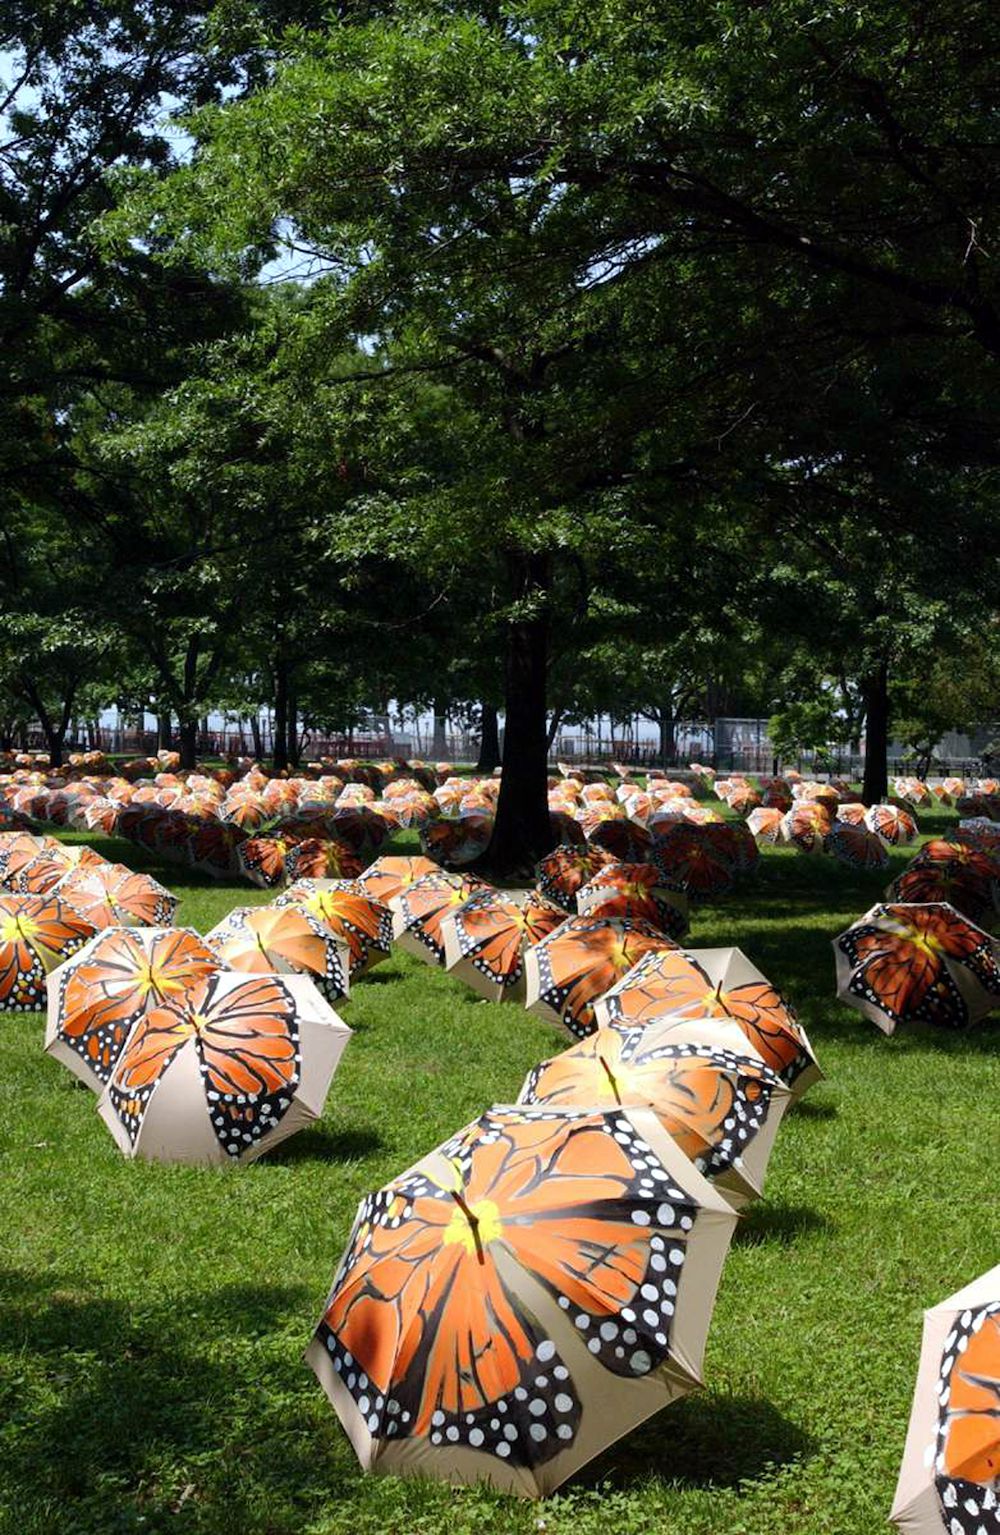 Victor Matthews, Beyond Metamorphosis, 2004, Battery Park, Manhattan, A project sponsored by the Lower Manhattan Cultural Council, NYC Parks. Matthews installed nearly 3,000 umbrellas, each individually hand-painted with a rendering of a Monarch butterfly. “The piece explores themes of transformation, migration and regeneration,” says Matthews. “Butterflies make an obvious spiritual gesture that’s often overlooked: of a life that never ends and a spirit that never dies,” said Matthews.<br/>